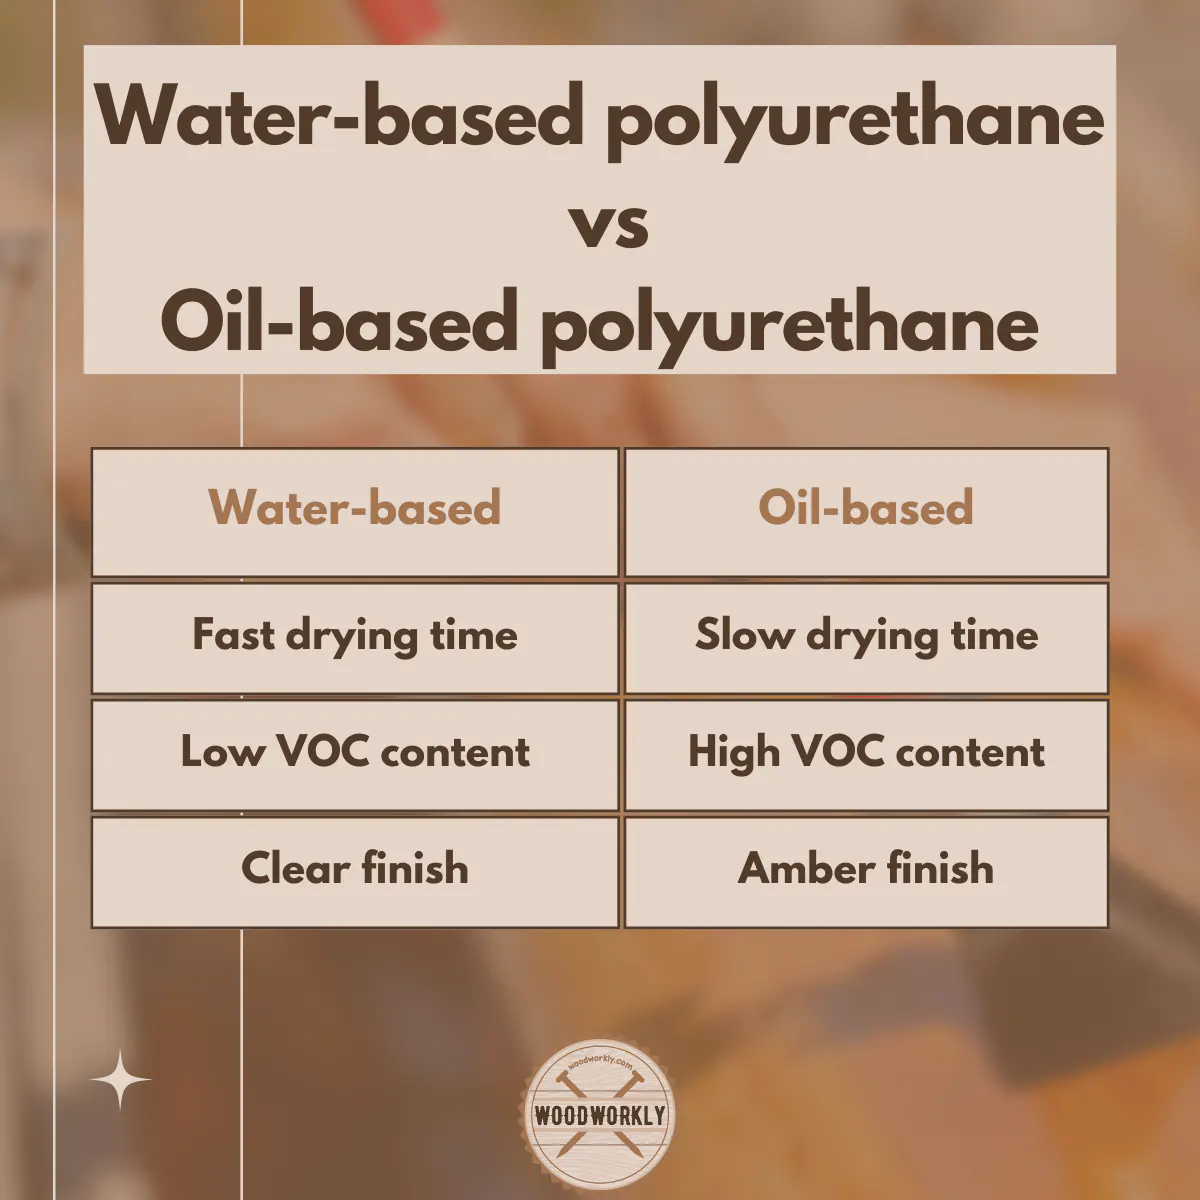 Differences between water-based polyurethane and oil-based polyurethane